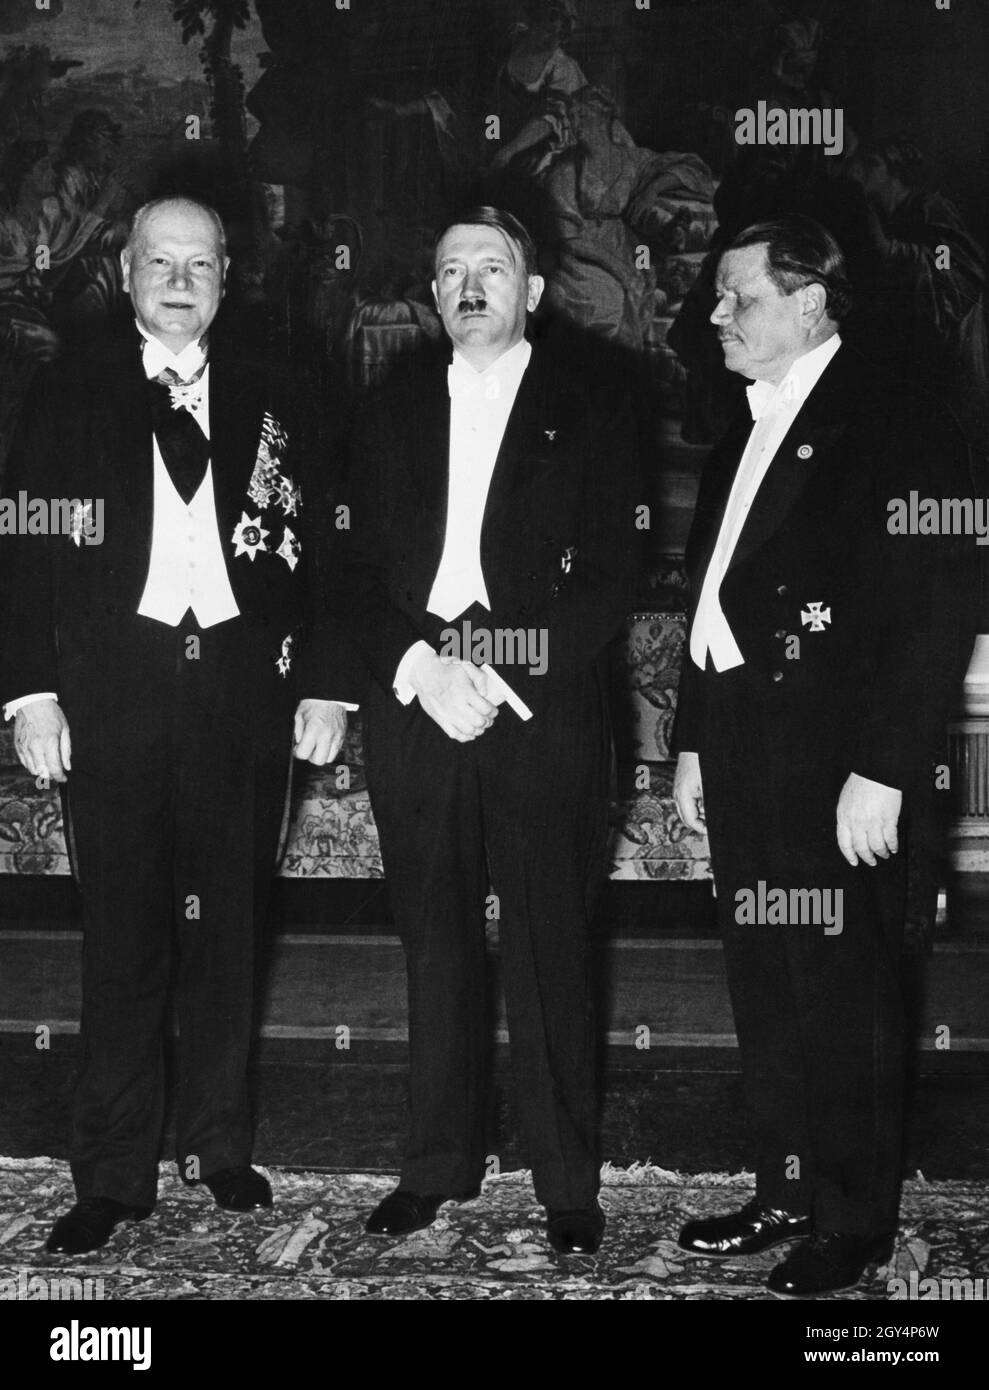 Adolf Hitler together with his cabinet members Dorpmüller (Reichsbahn) and Ohnesorge (Reichspost). Both were entrusted with the Gleichschaltung of their areas of responsibility. [automated translation] Stock Photo